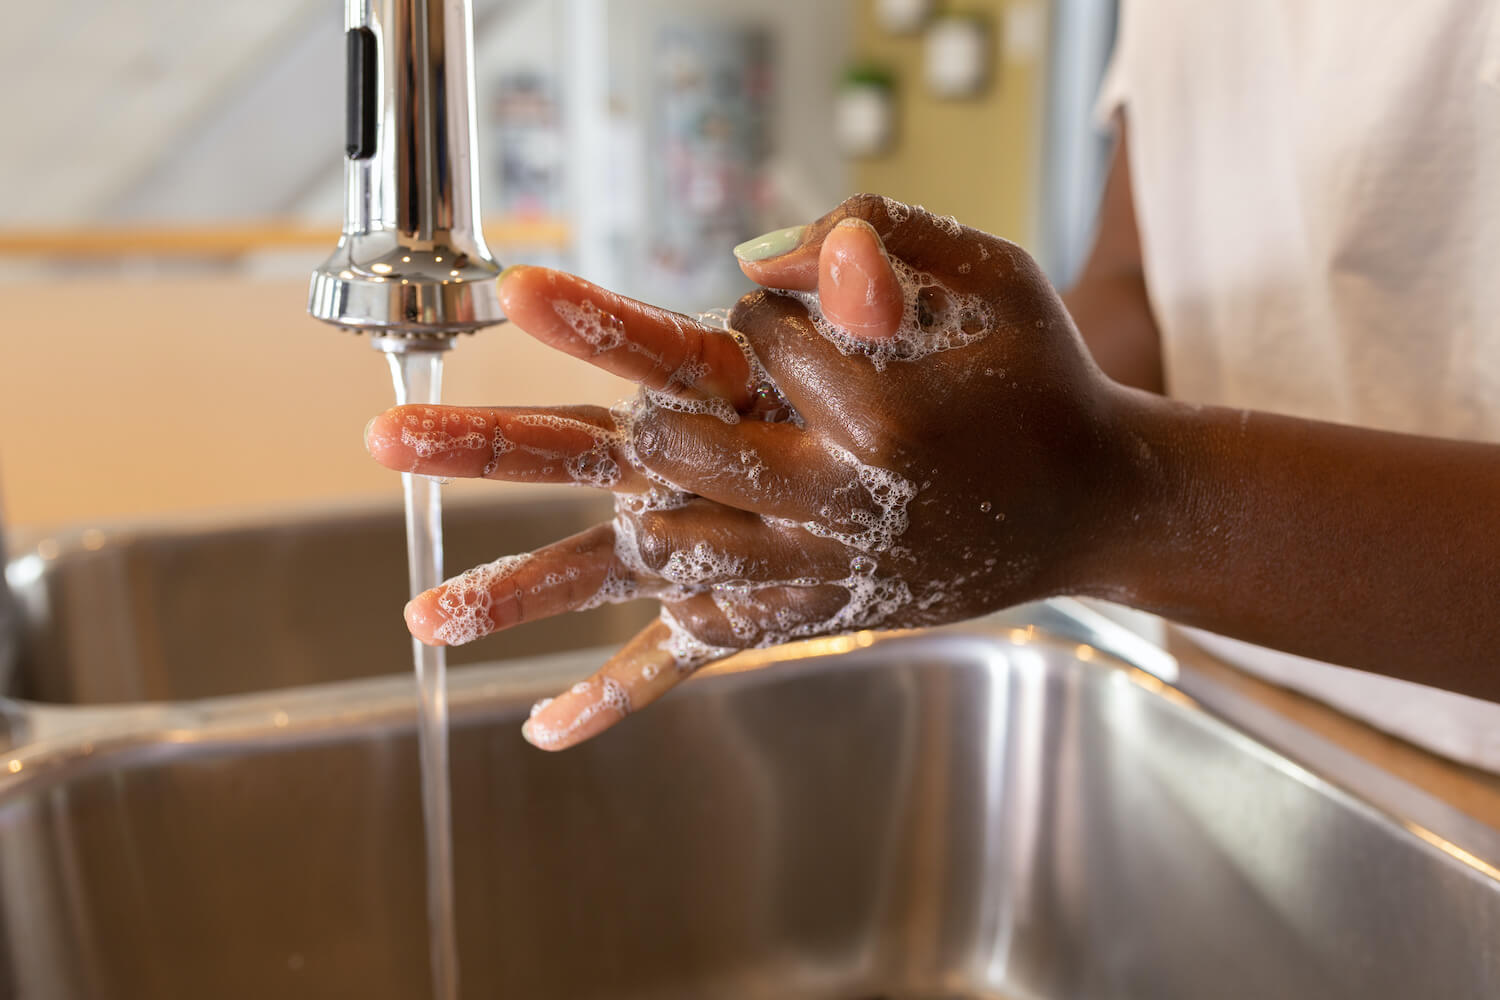 Up-close photo of someone washing their hands. September 2021